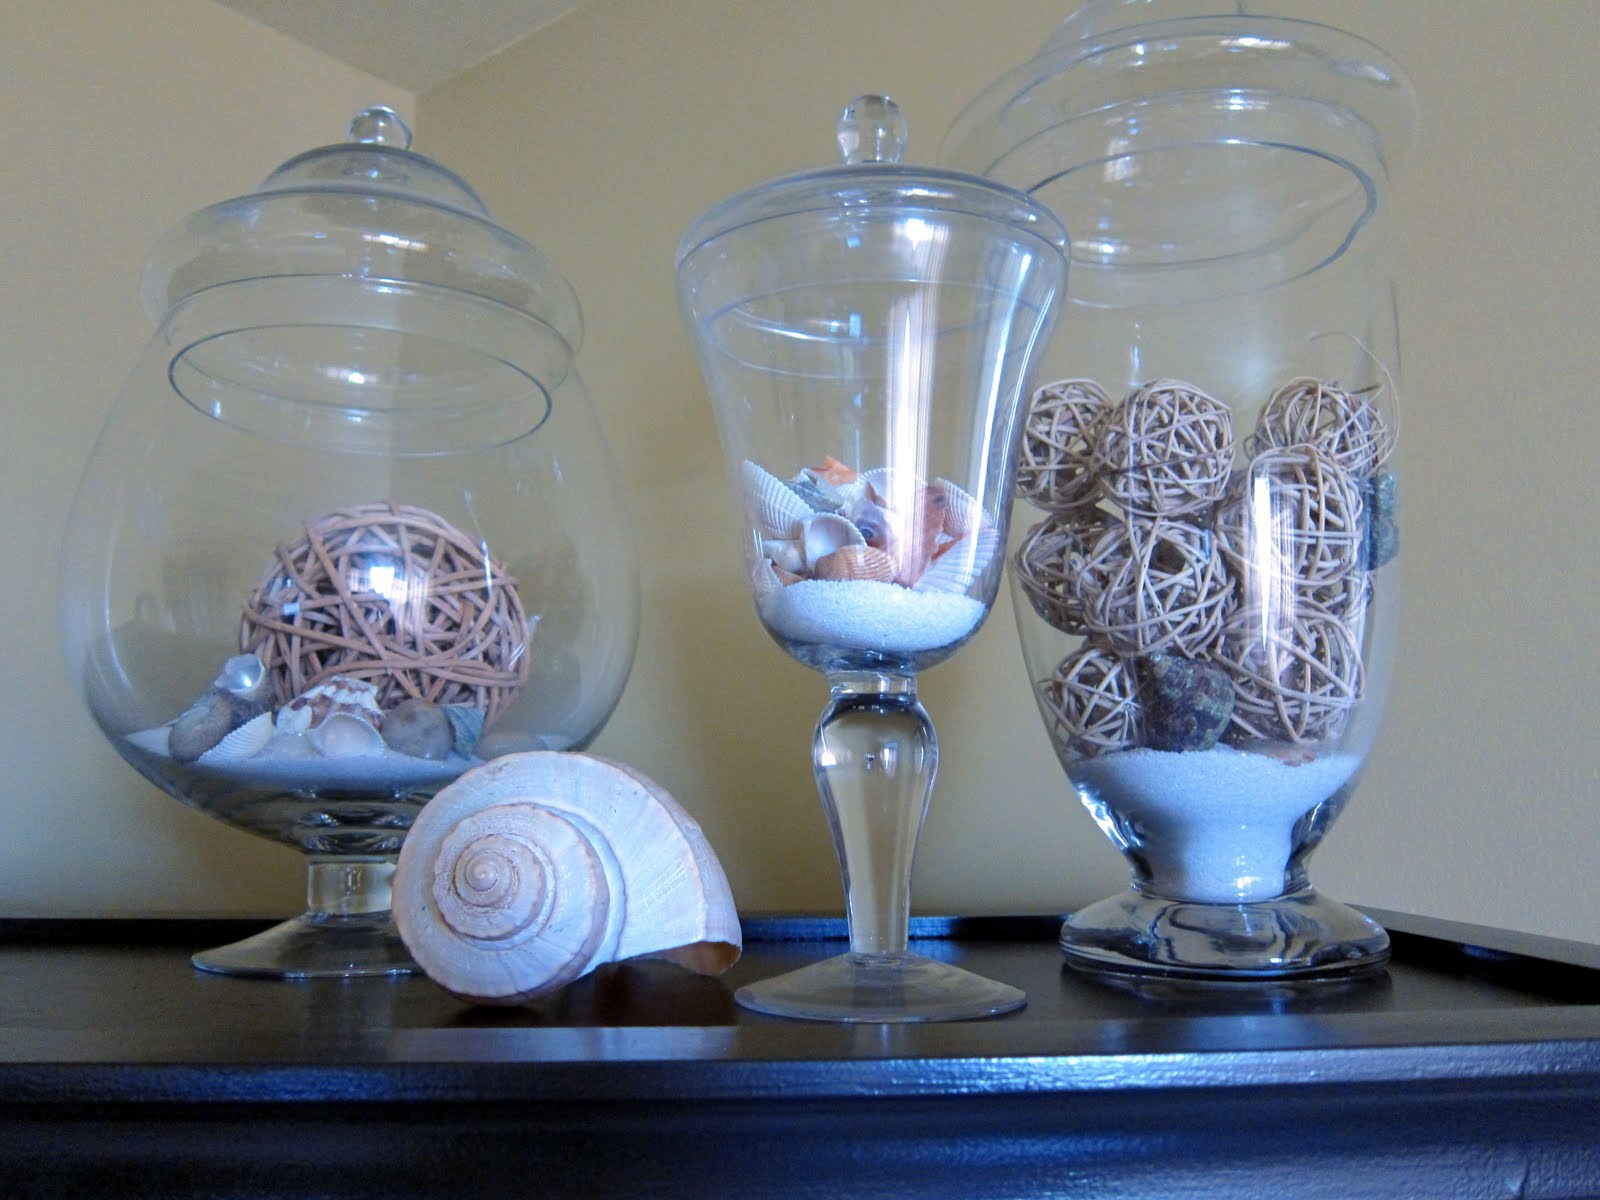 Shells in Apothecary Jars